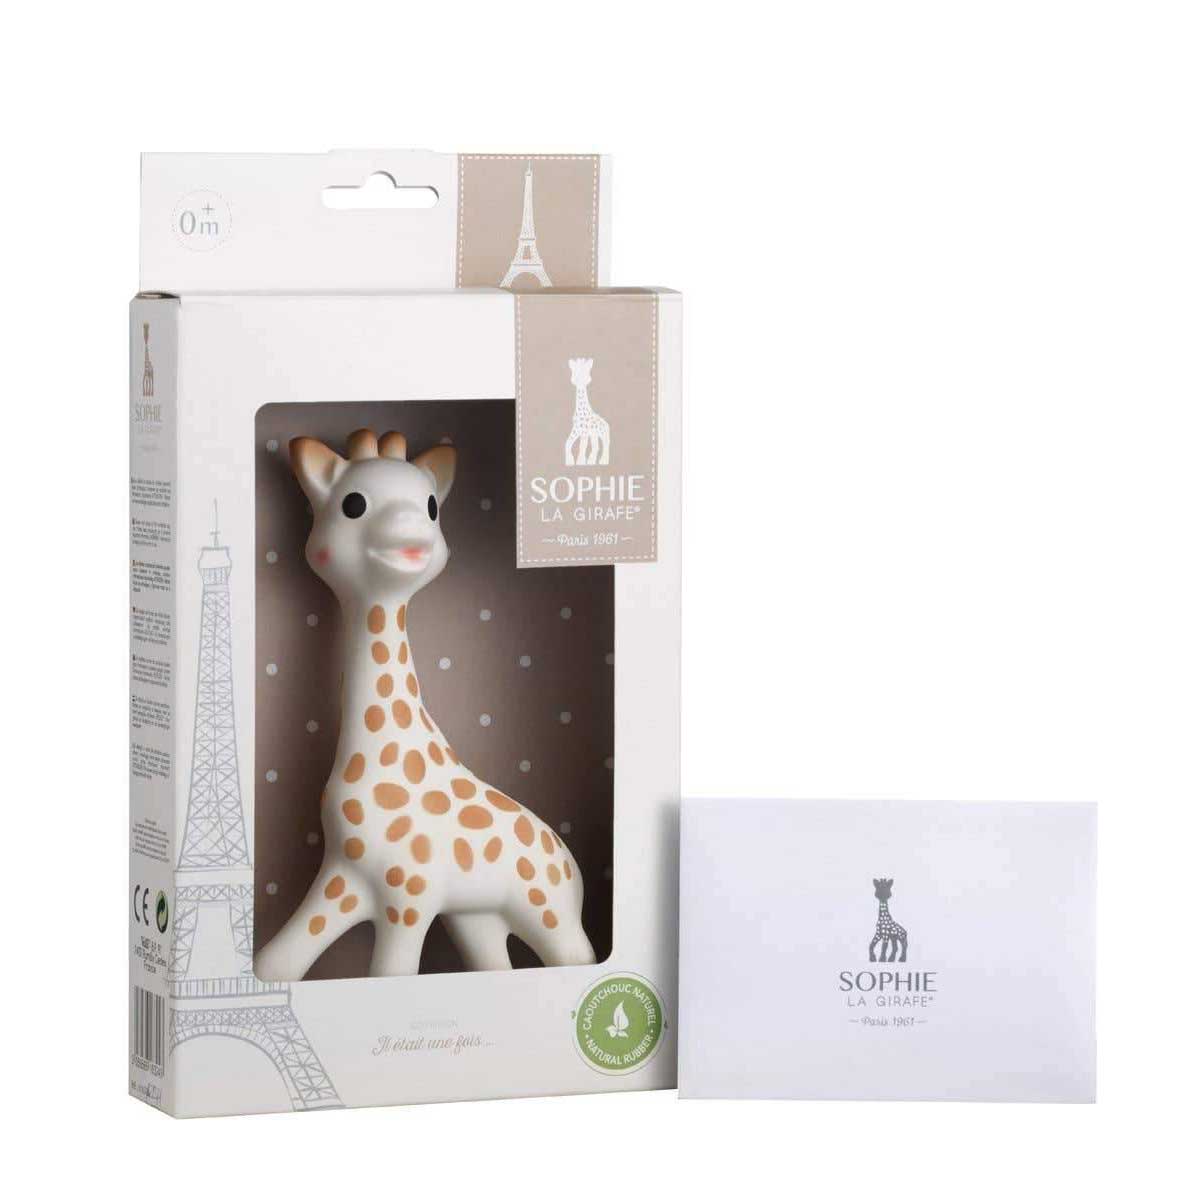 Sophie La Girafe White Box Classic Baby Teether product gift box shot for South Hous.